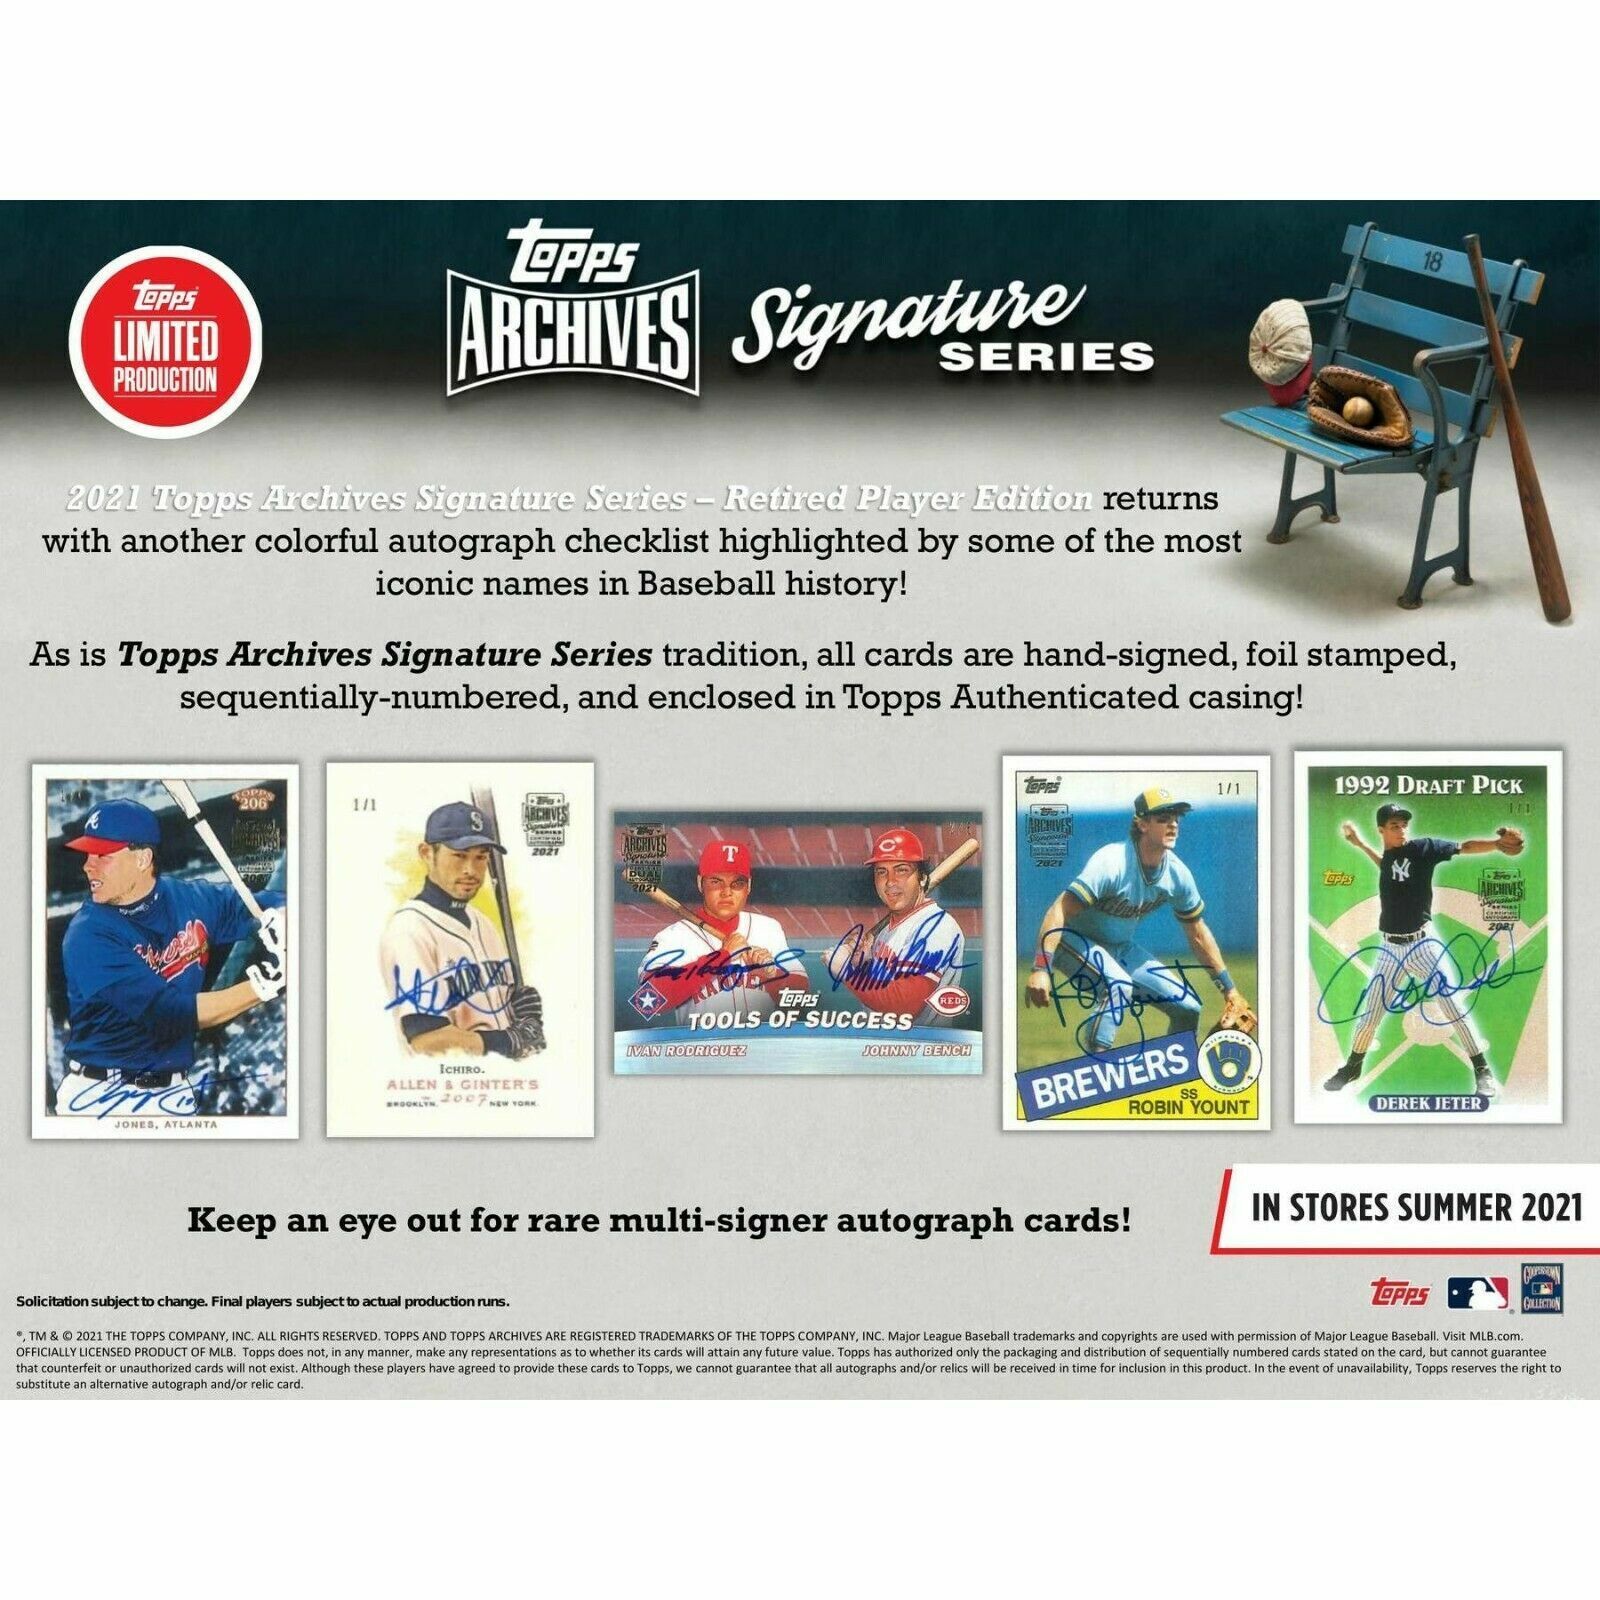 SEATTLE MARINERS 2021 TOPPS ARCHIVES SIGNATURE RETIRED 1/2 CASE 10 BOX BREAK #1